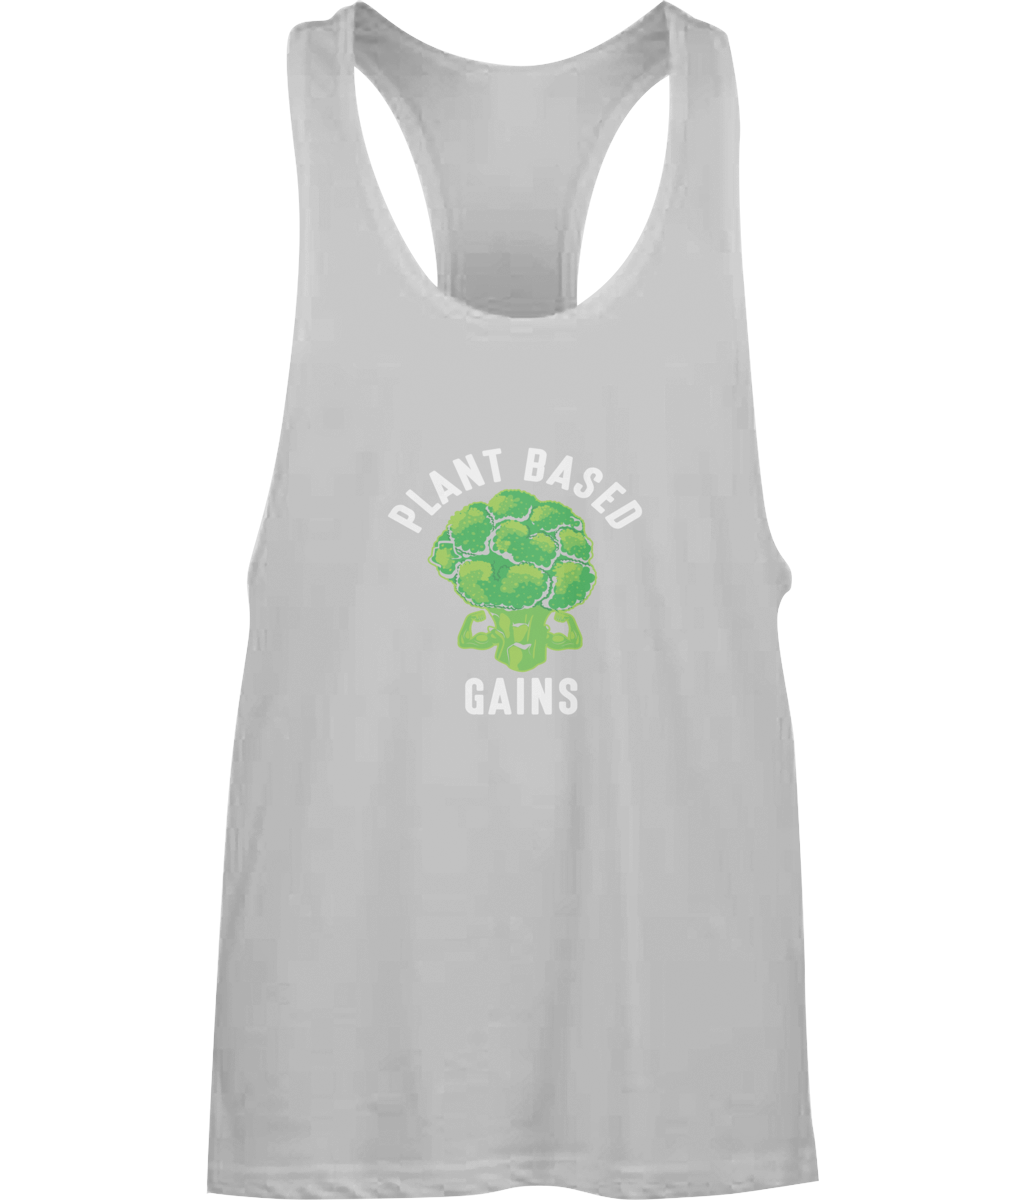 Plant Based Gains Men's Muscle Tank